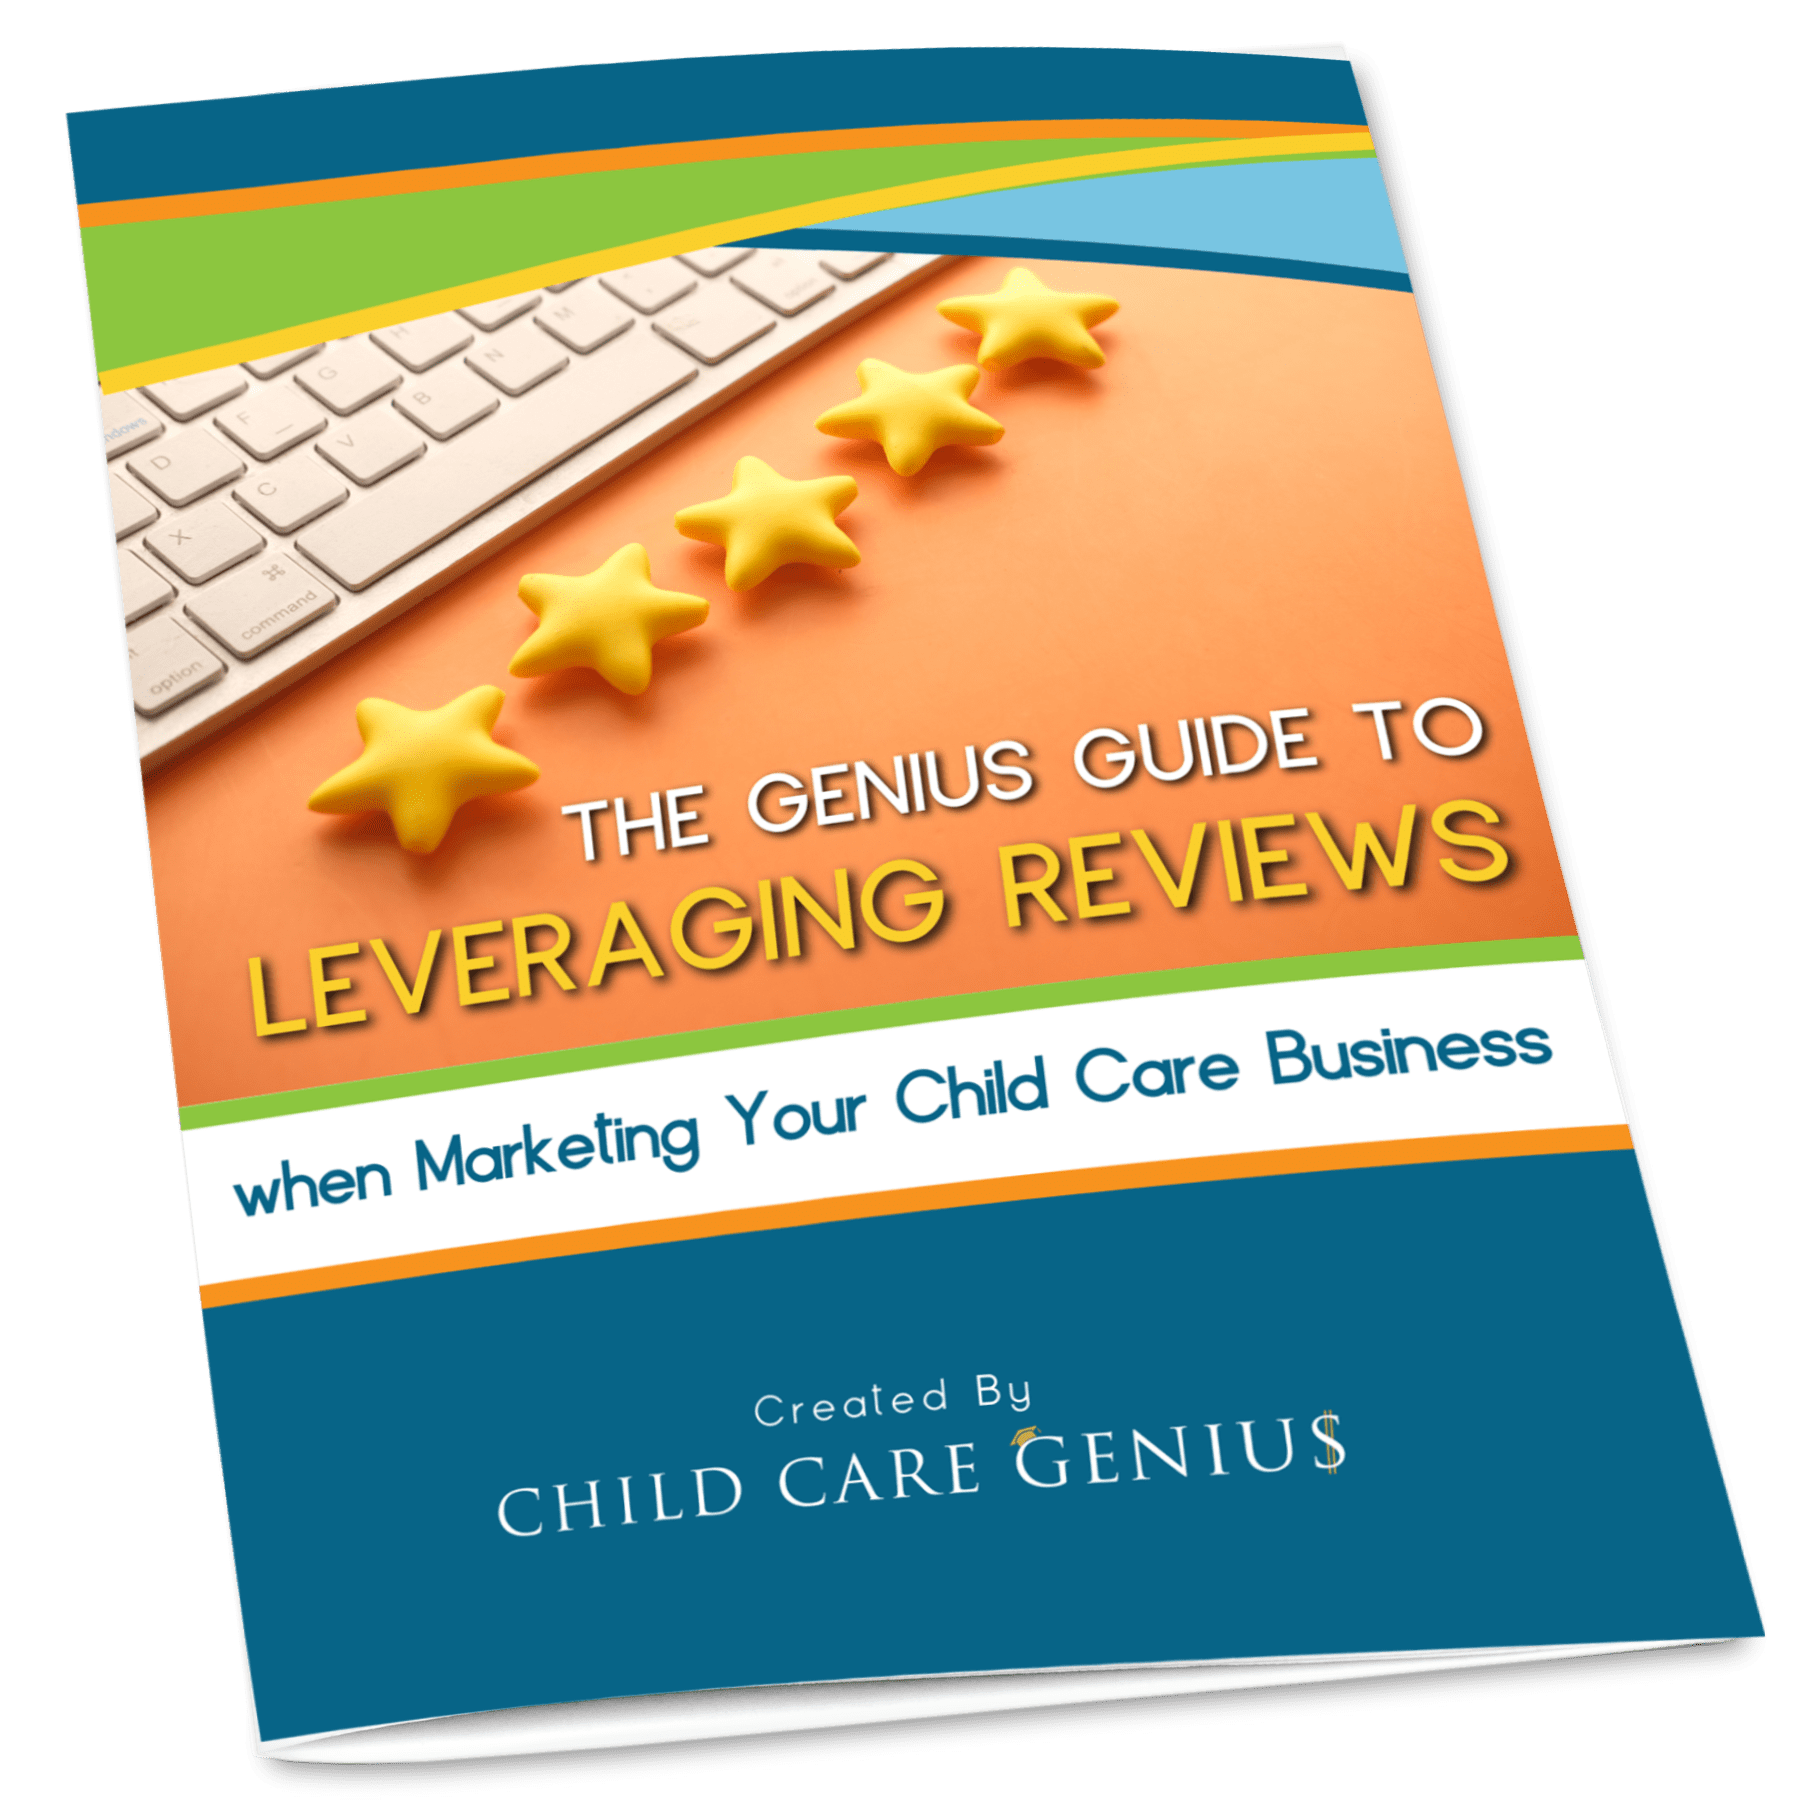 Free Book for Leveraging Reviews